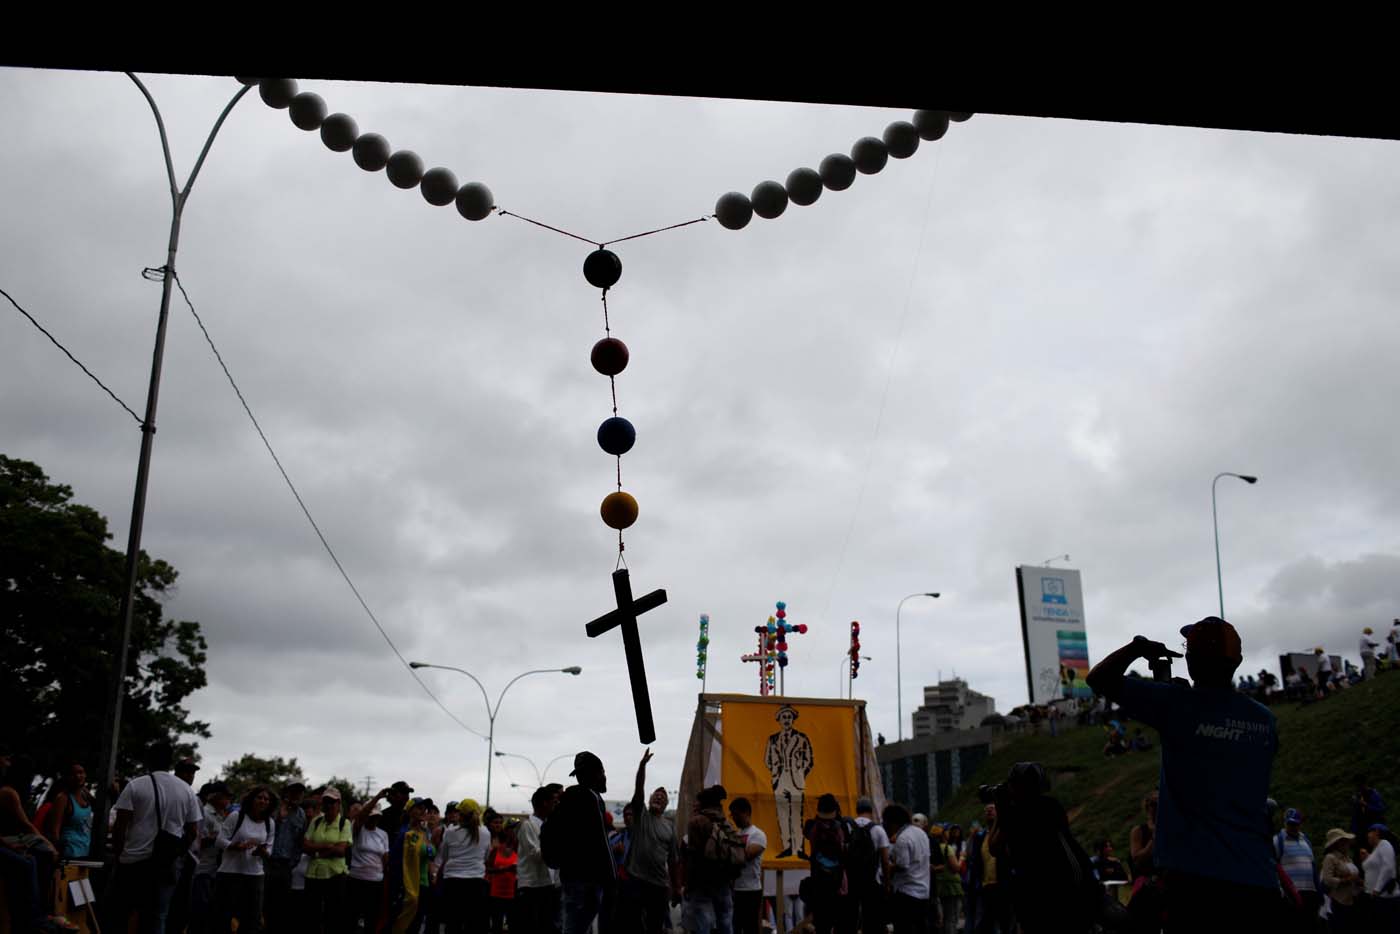 Opposition supporters hang a giant rosary beads from a bridge as they block a highway, during a protest against Venezuelan President Nicolas Maduro's government in Caracas, Venezuela May 15, 2017. REUTERS/Carlos Garcia Rawlins